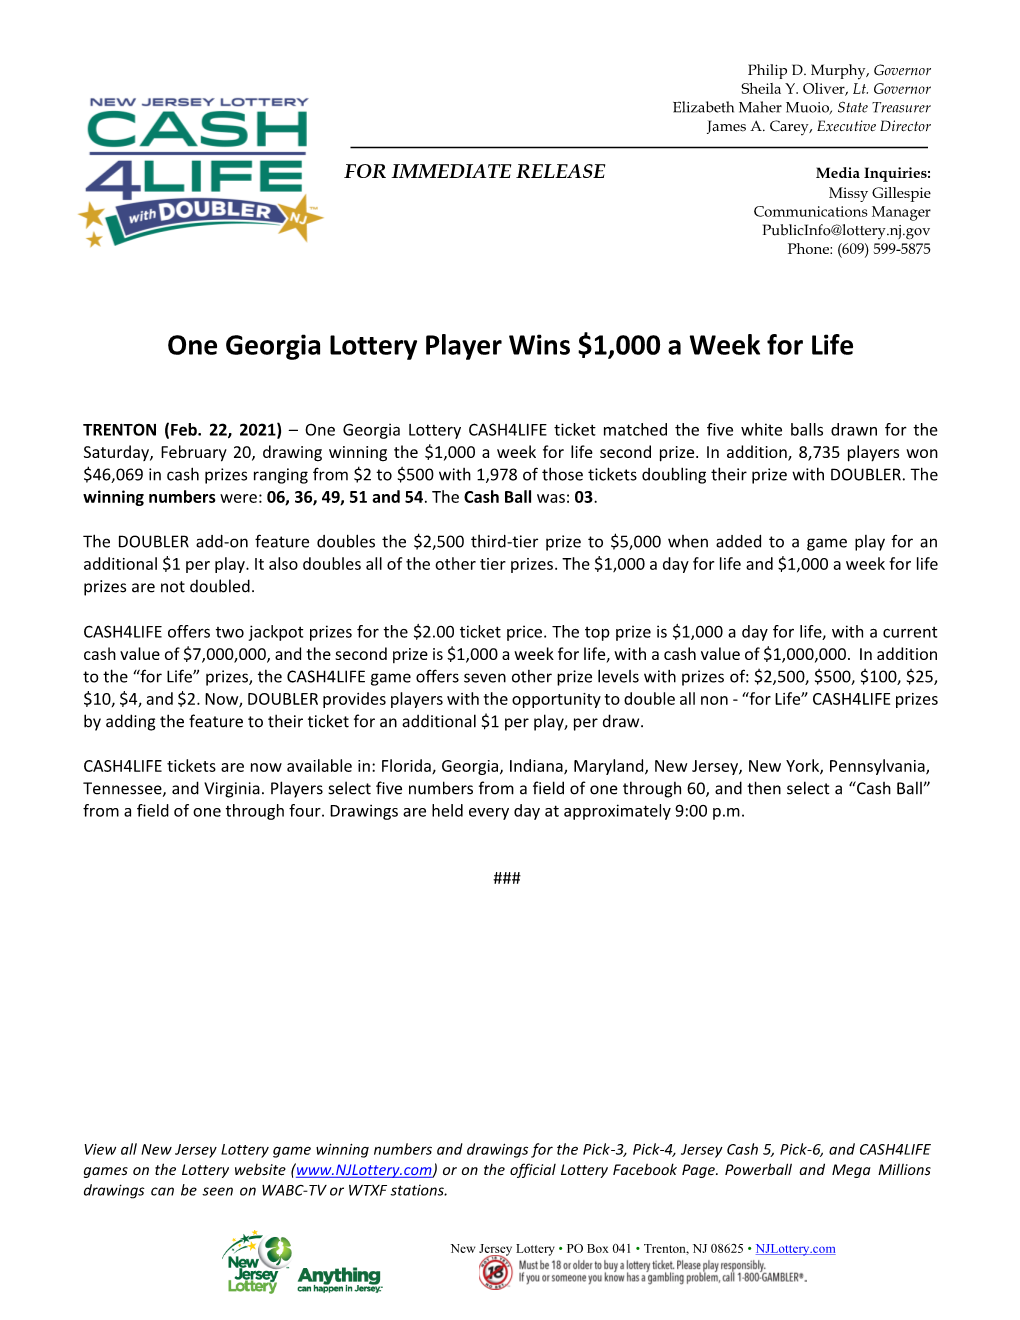 One Georgia Lottery Player Wins $1,000 a Week for Life